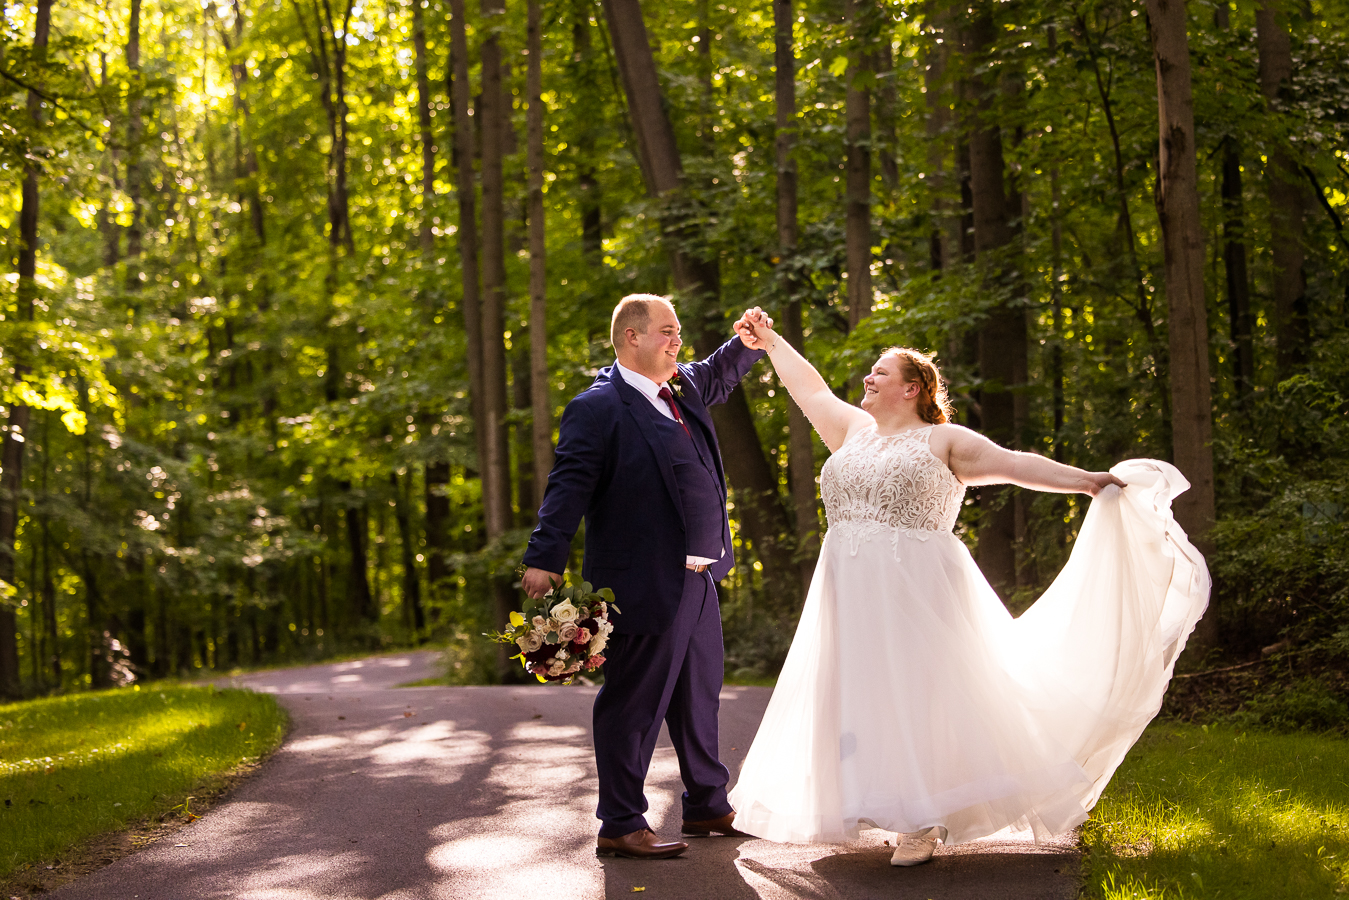 fun, vibrant image of the bride and groom as they walk down the pathway through the woods as the bride holds out her dress and spins during their outdoor fall wedding 